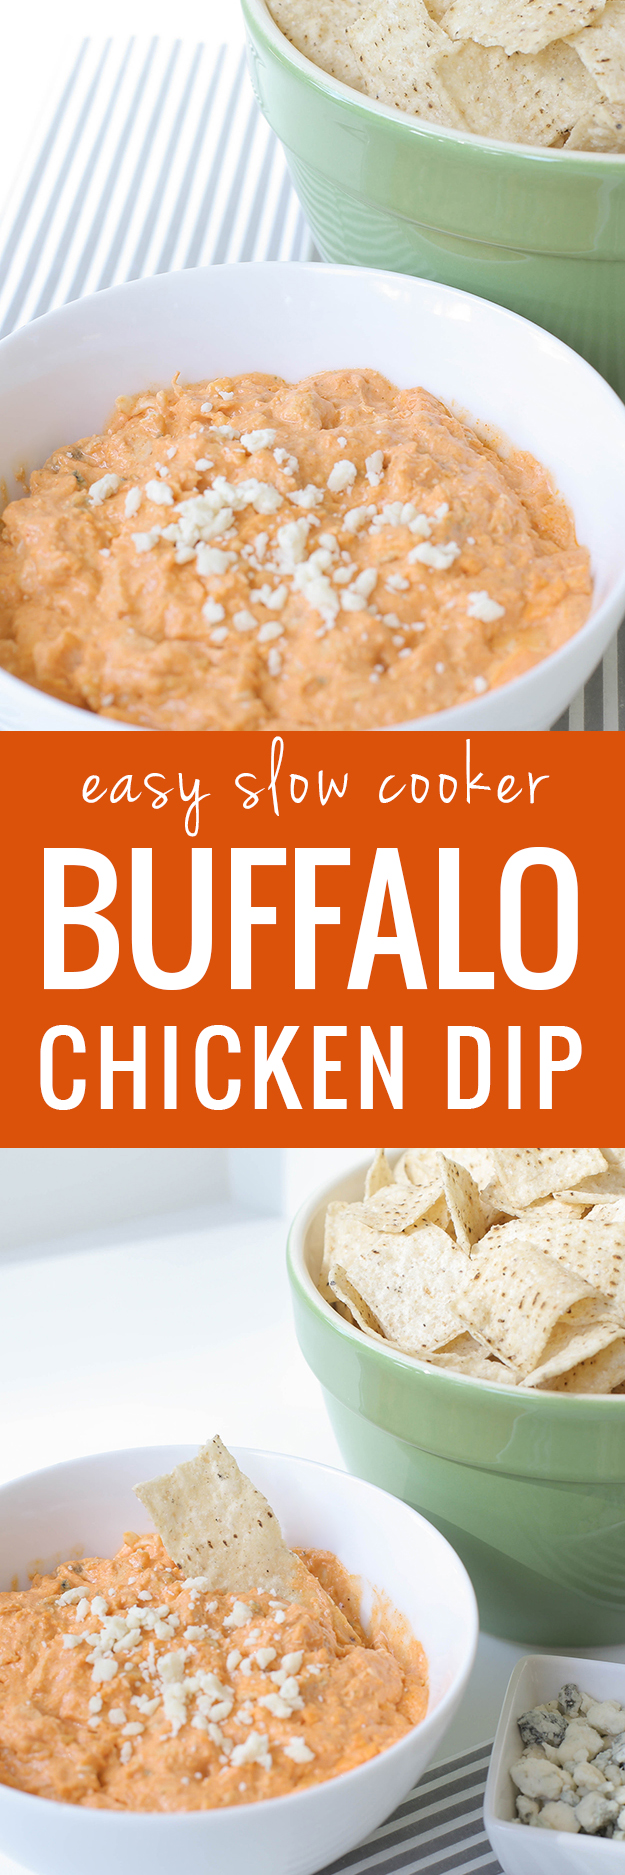 Easy Slow Cooker Buffalo Chicken Dip Recipe and Appetizer